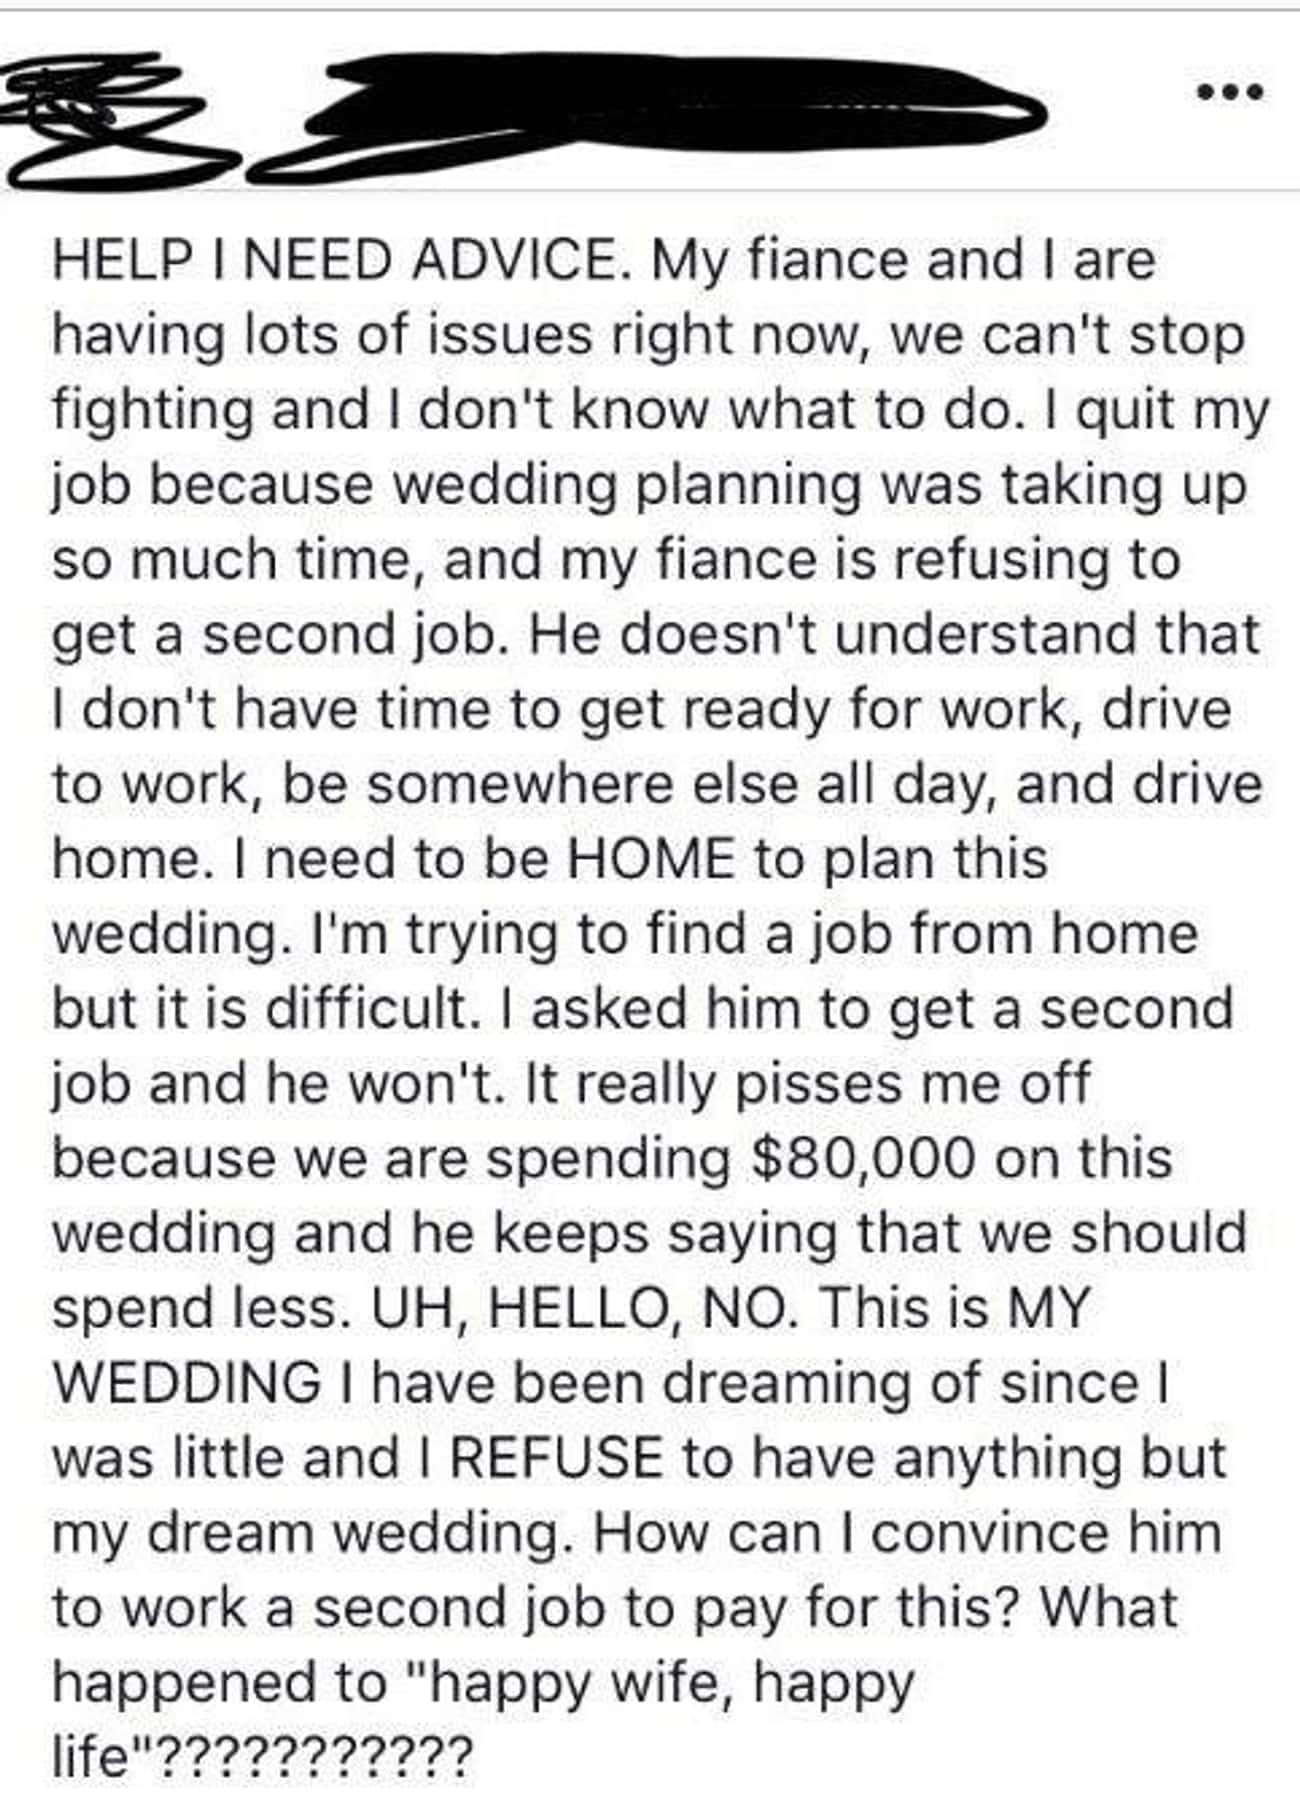 Future Spouse Is Mad Because Partner Will Not Work A Second Job To Fund Their $80,000 Wedding